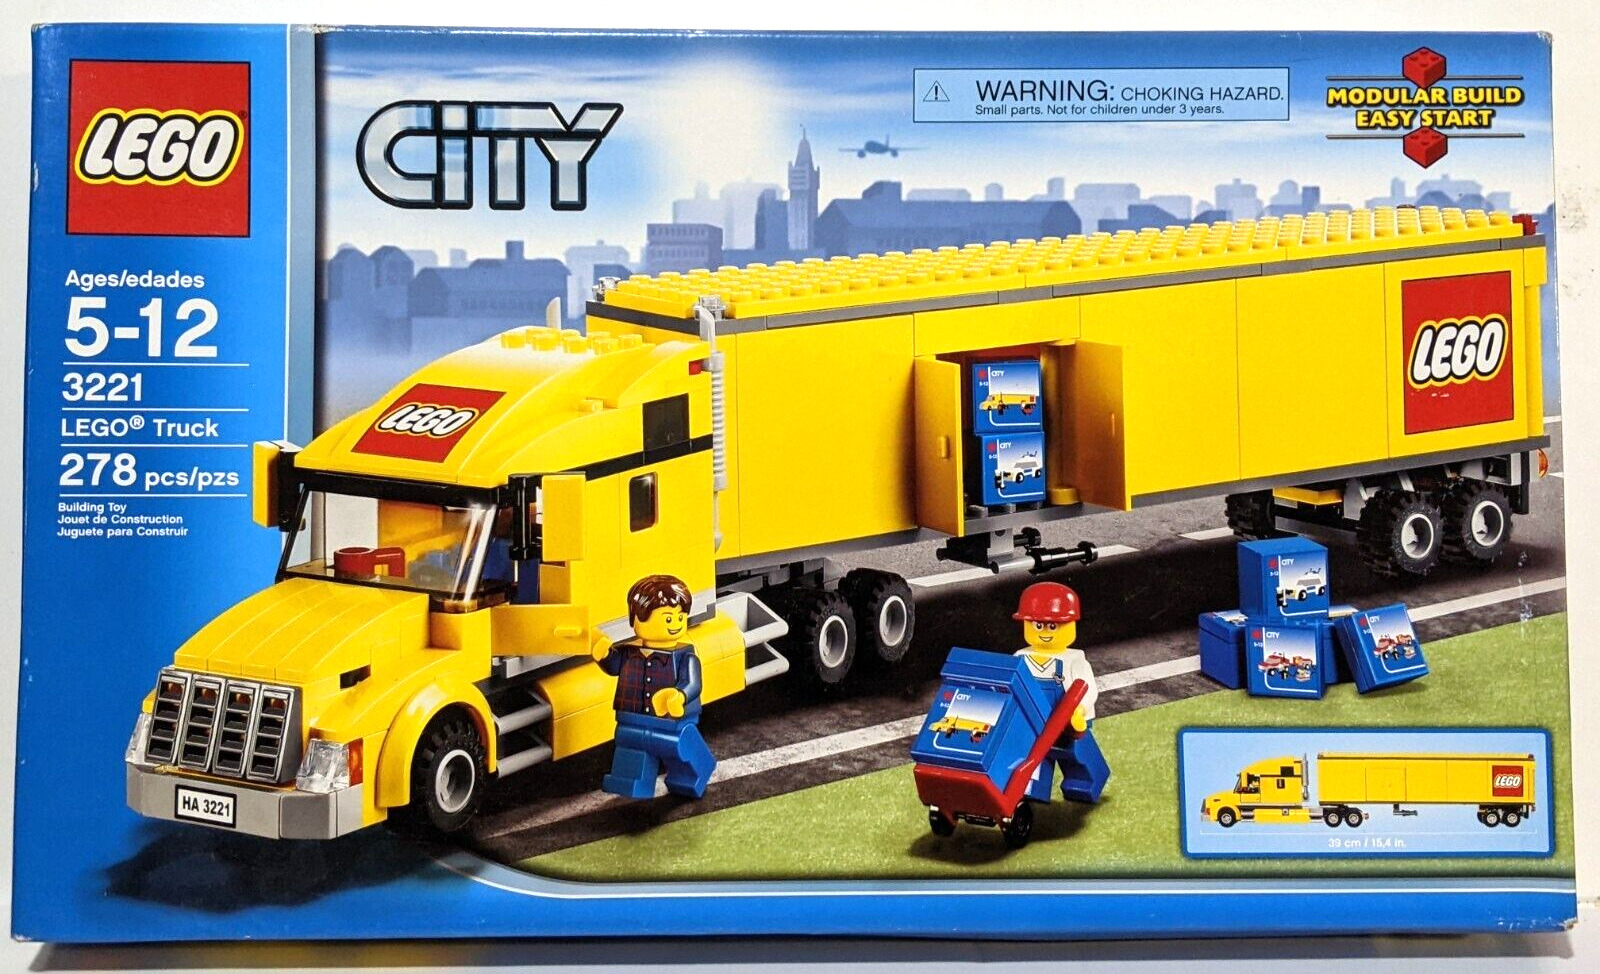 LEGO CITY 3221 Truck BRAND NEW in Factory Sealed Imperfect Box NISB READ L@@K